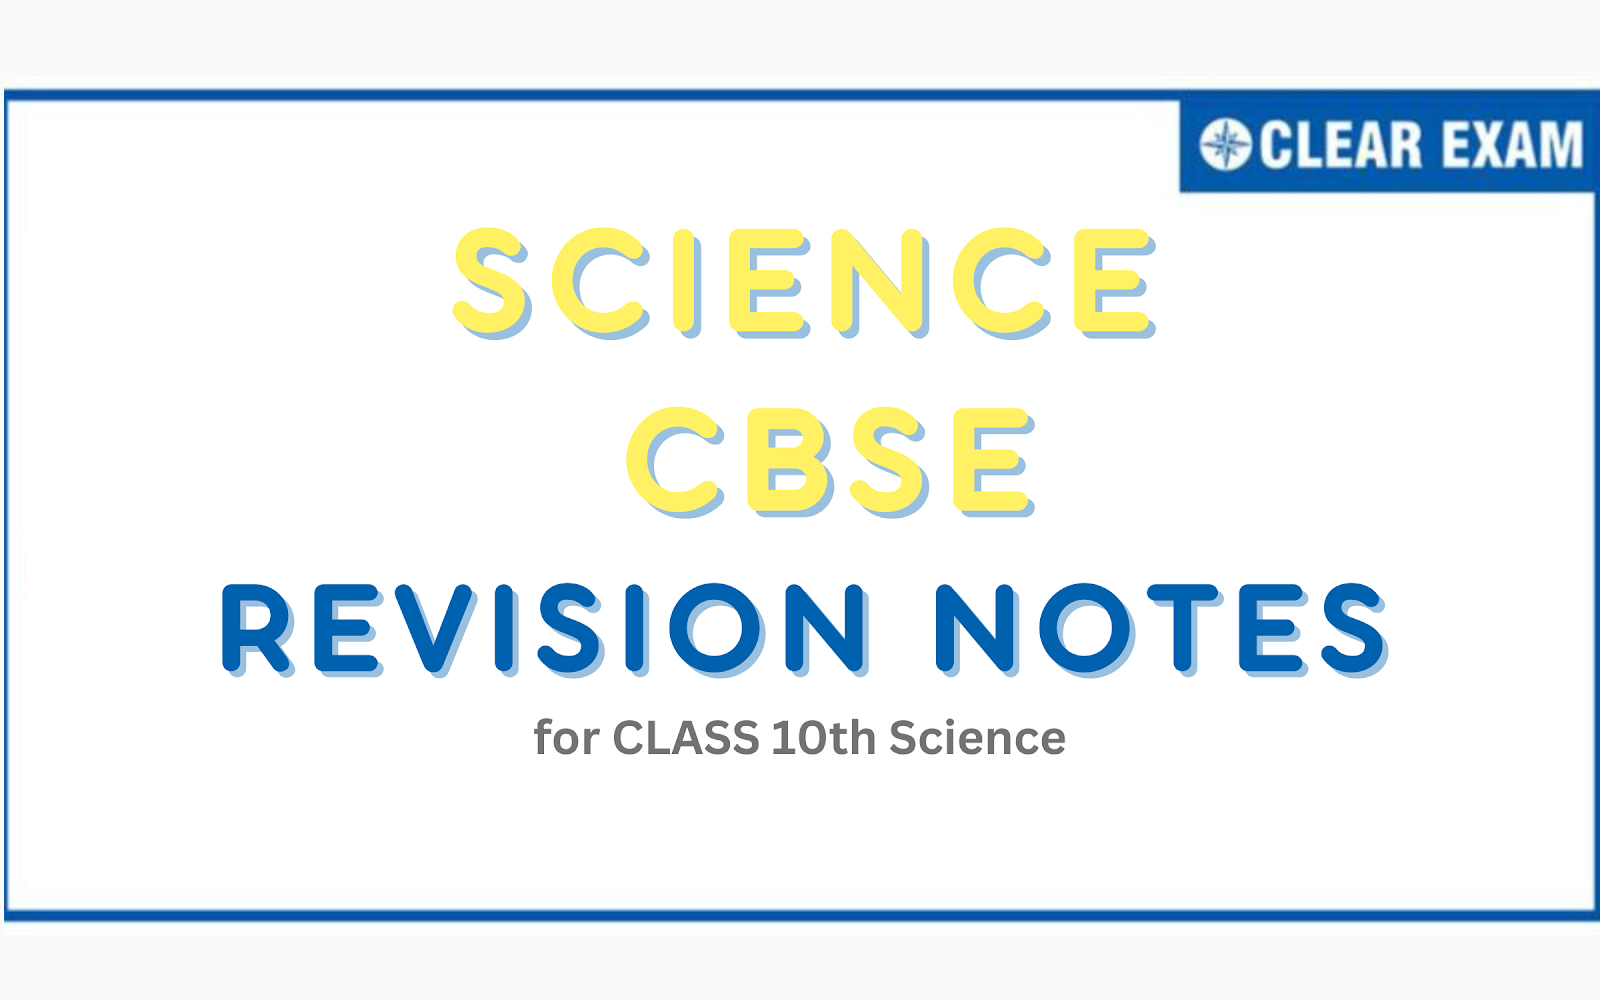 CBSE Class 10 Science Revision Notes